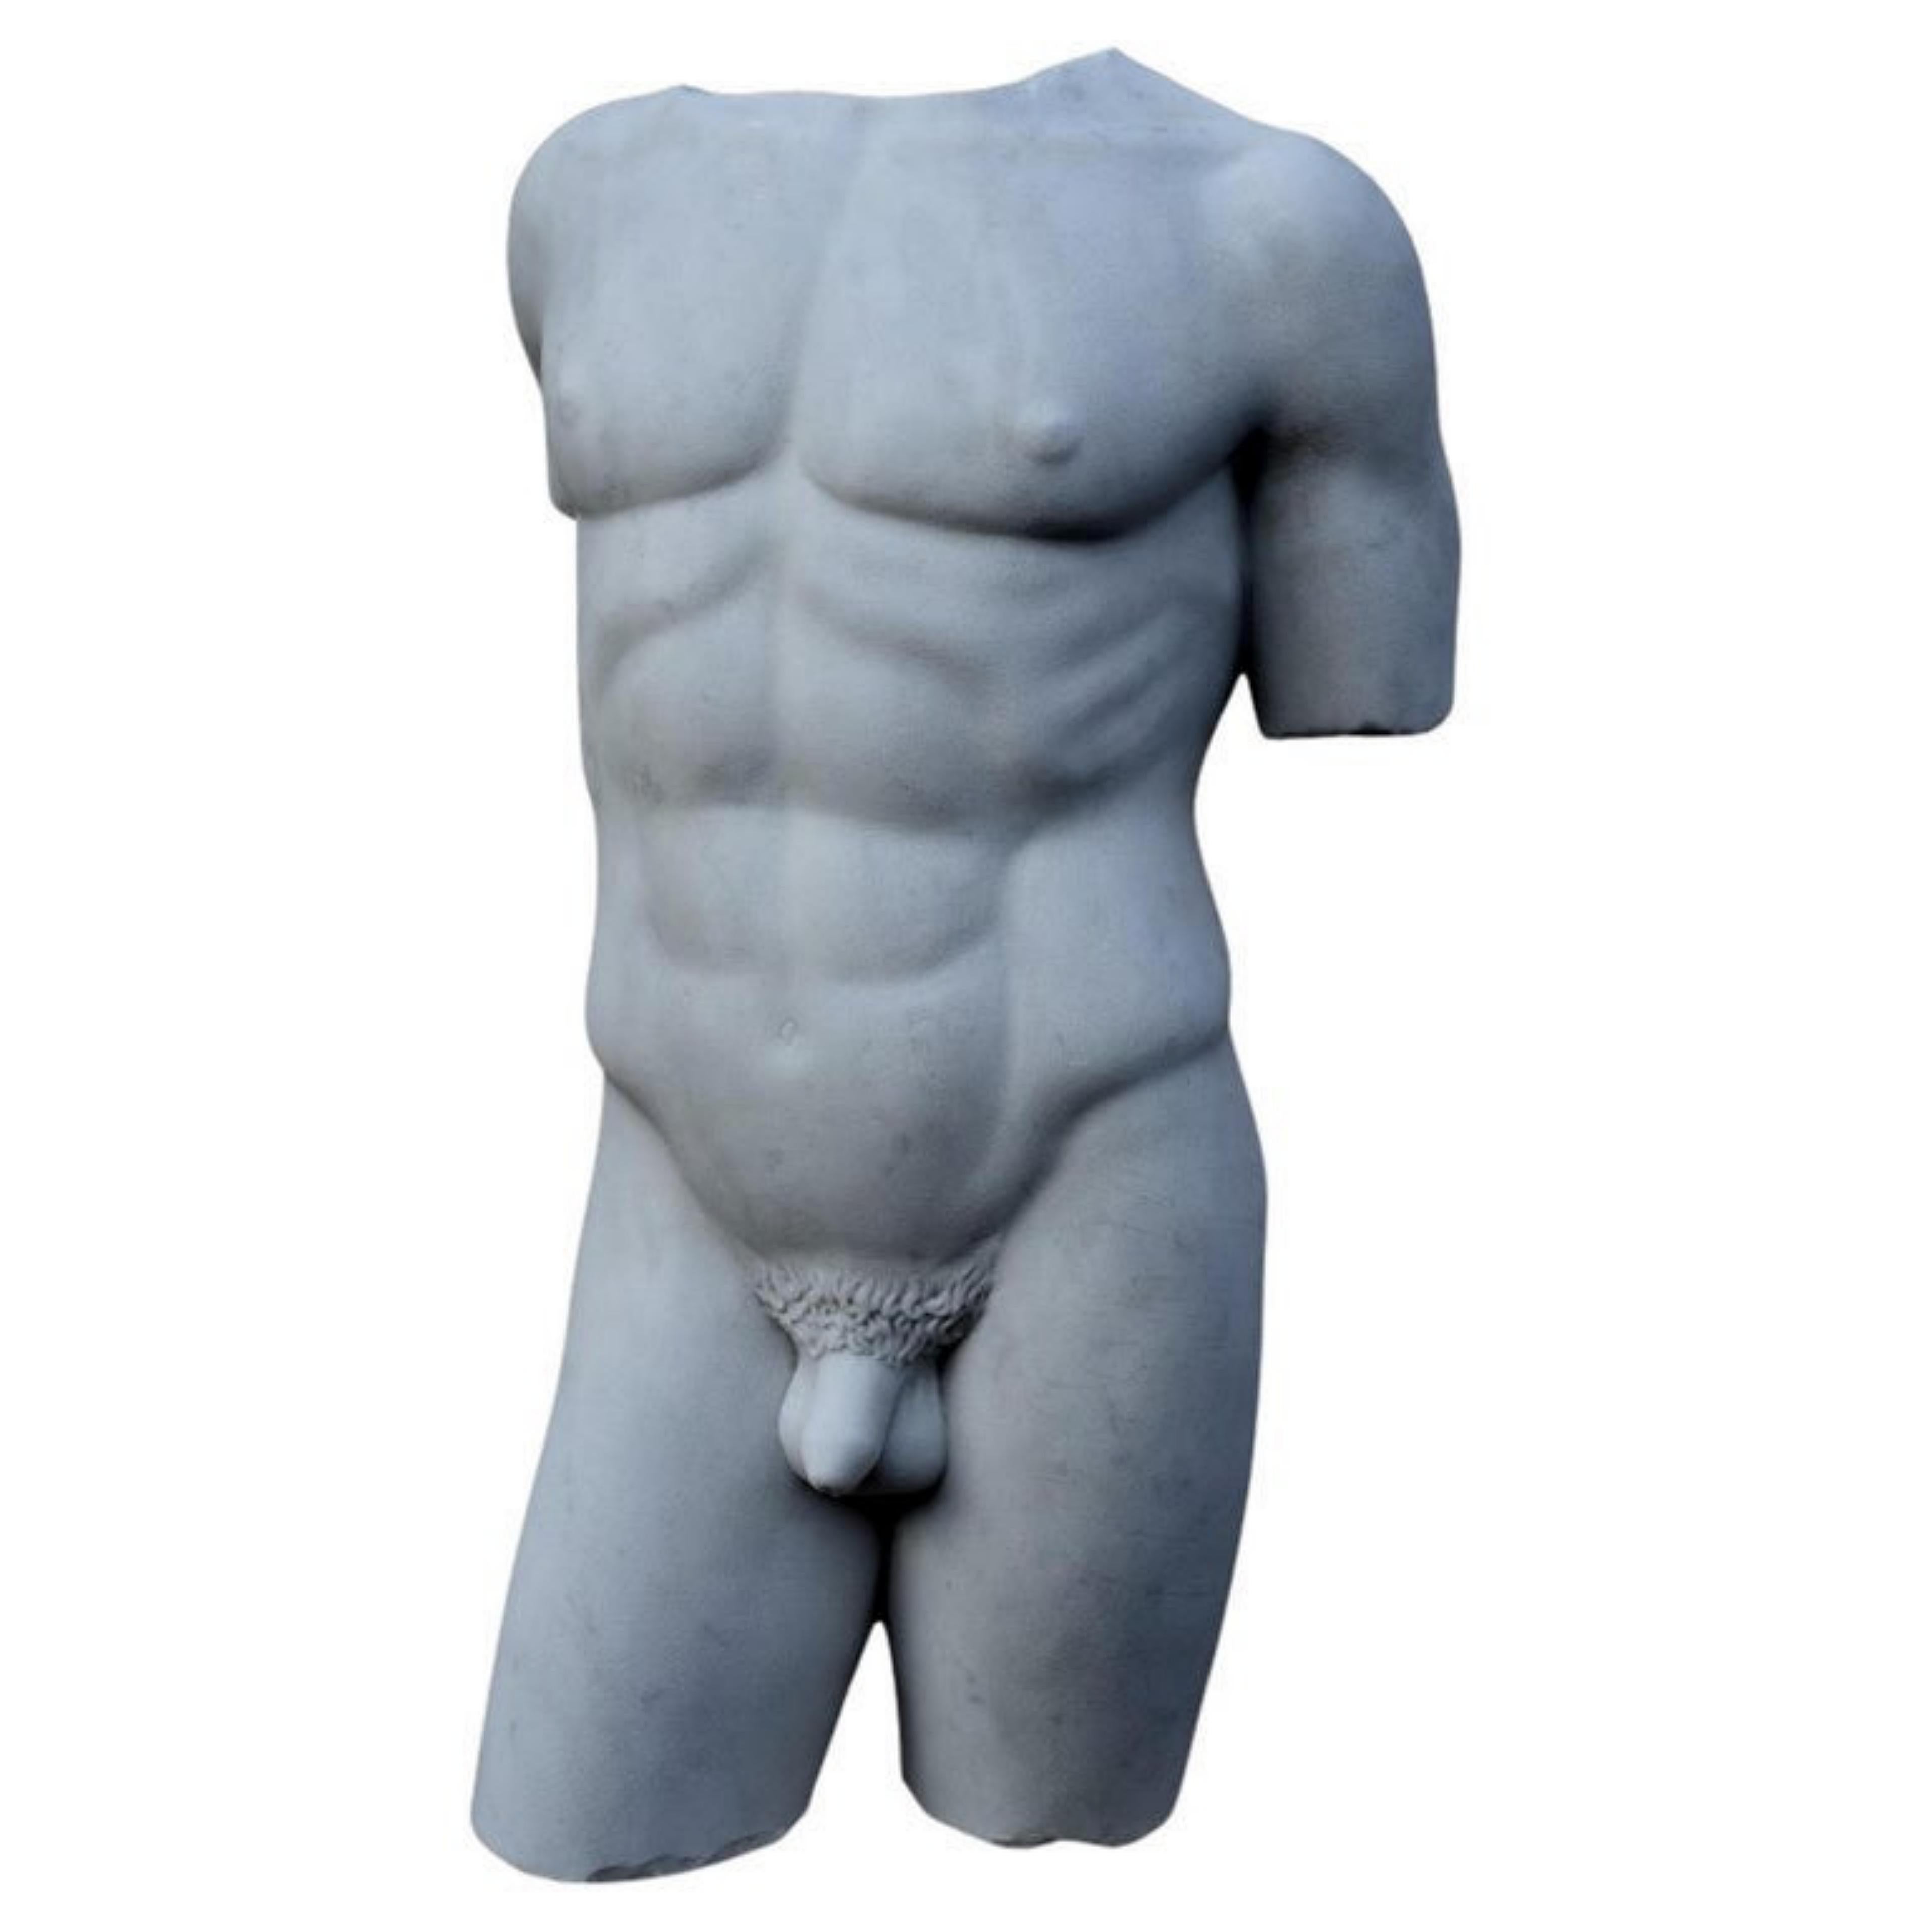 Roman torso in Carrara white marble early 20th century

Reproduction of a removed torso from the Capitoline Museums in white Carrara marble early 20th century
Italy
Measures: height 68 cm
Maximum height 94 cm
Width 40 cm
Depth 23base cm
Base of the